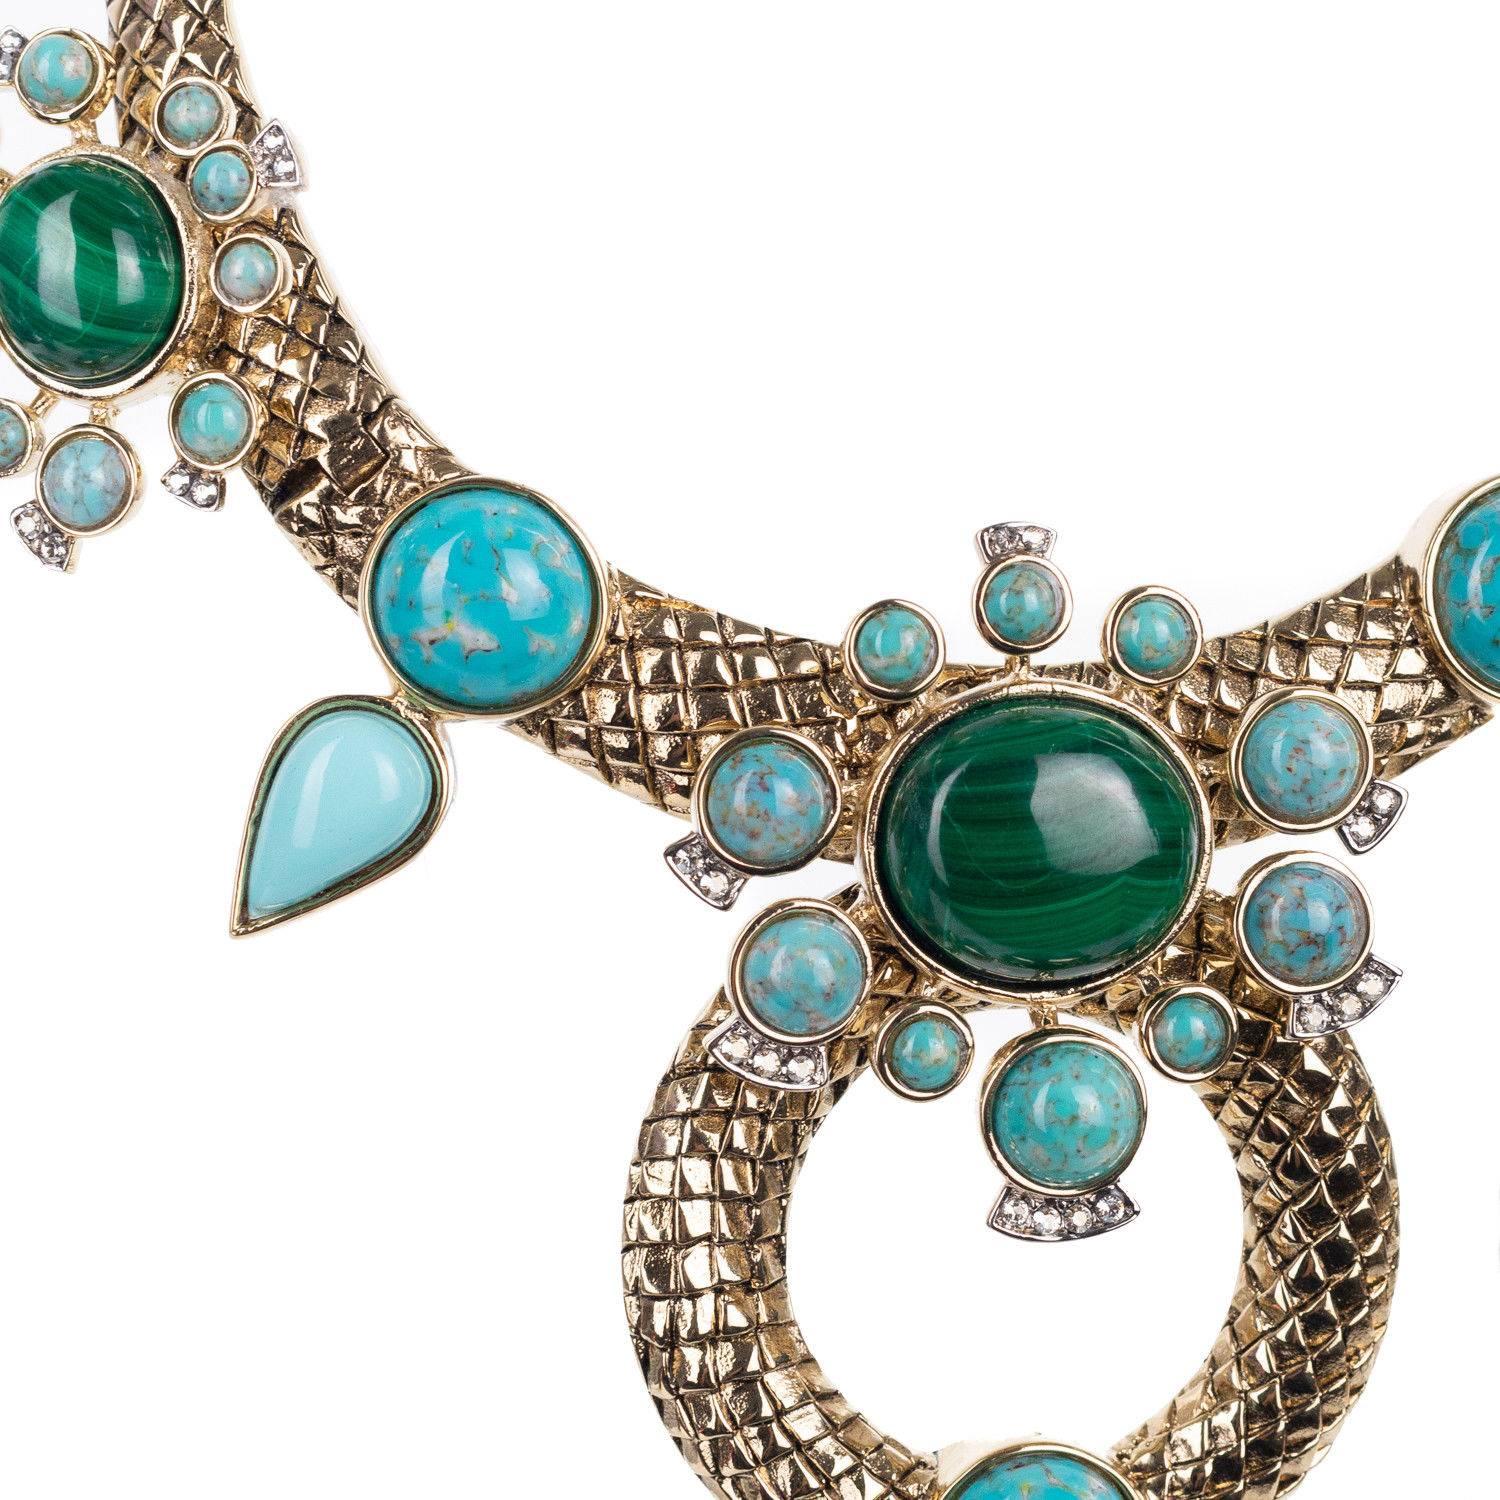 Bohemian Gold and Turquoise Necklace is the perfect evening statement piece or for those extravagant poolside parties. Featuring etched gold tone brass collar embellished with malachite starbursts and turquoise colored stones in teardrop design with